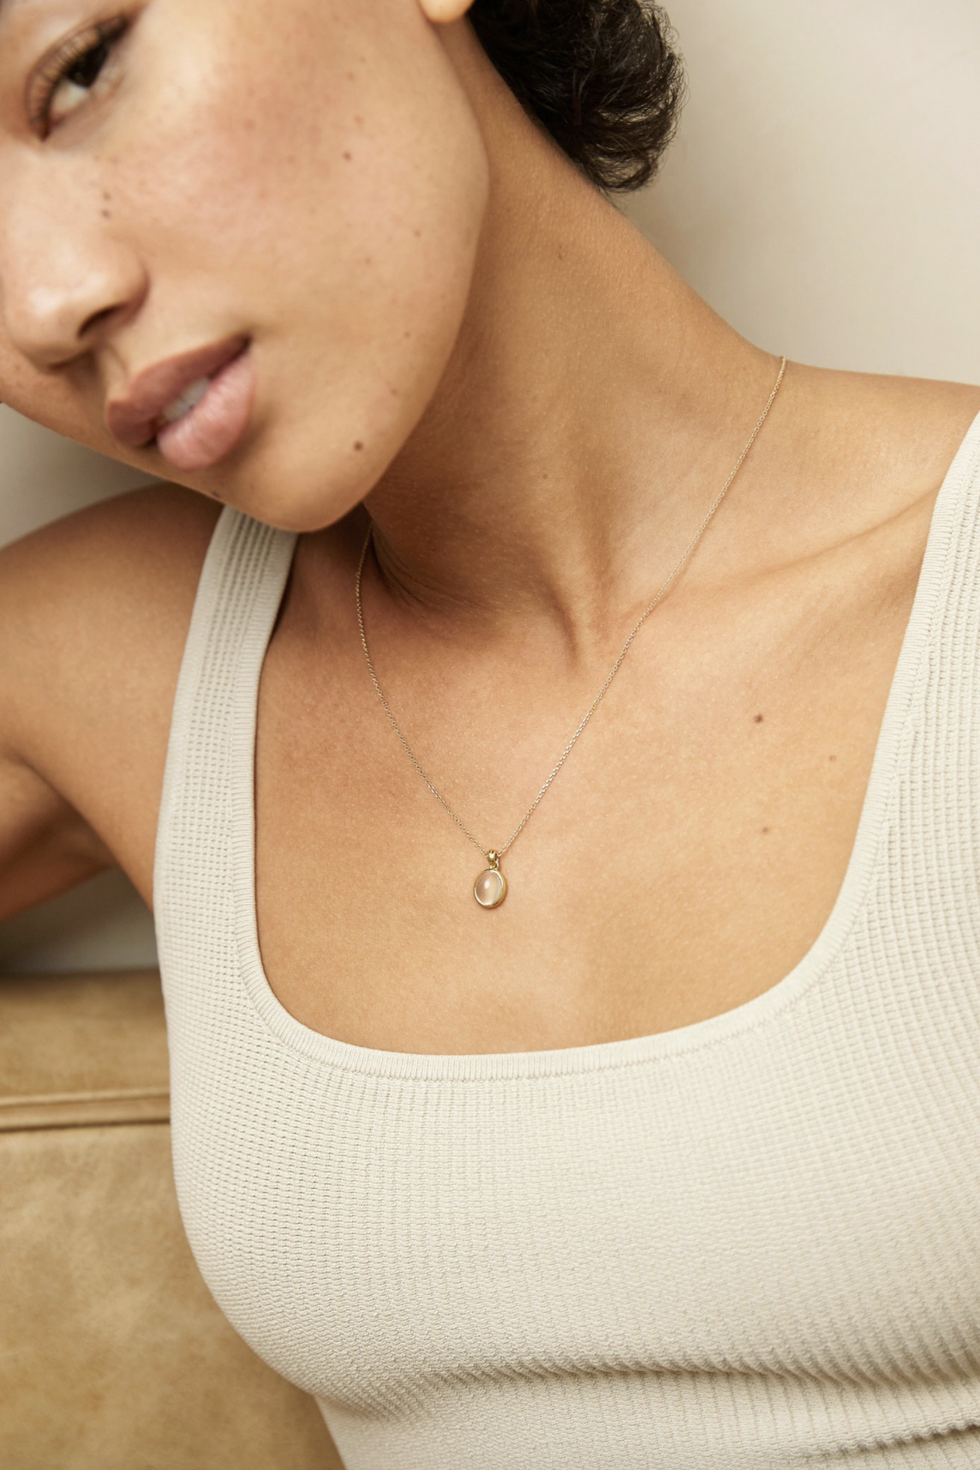 Delicate and dainty jewelry for everyday.